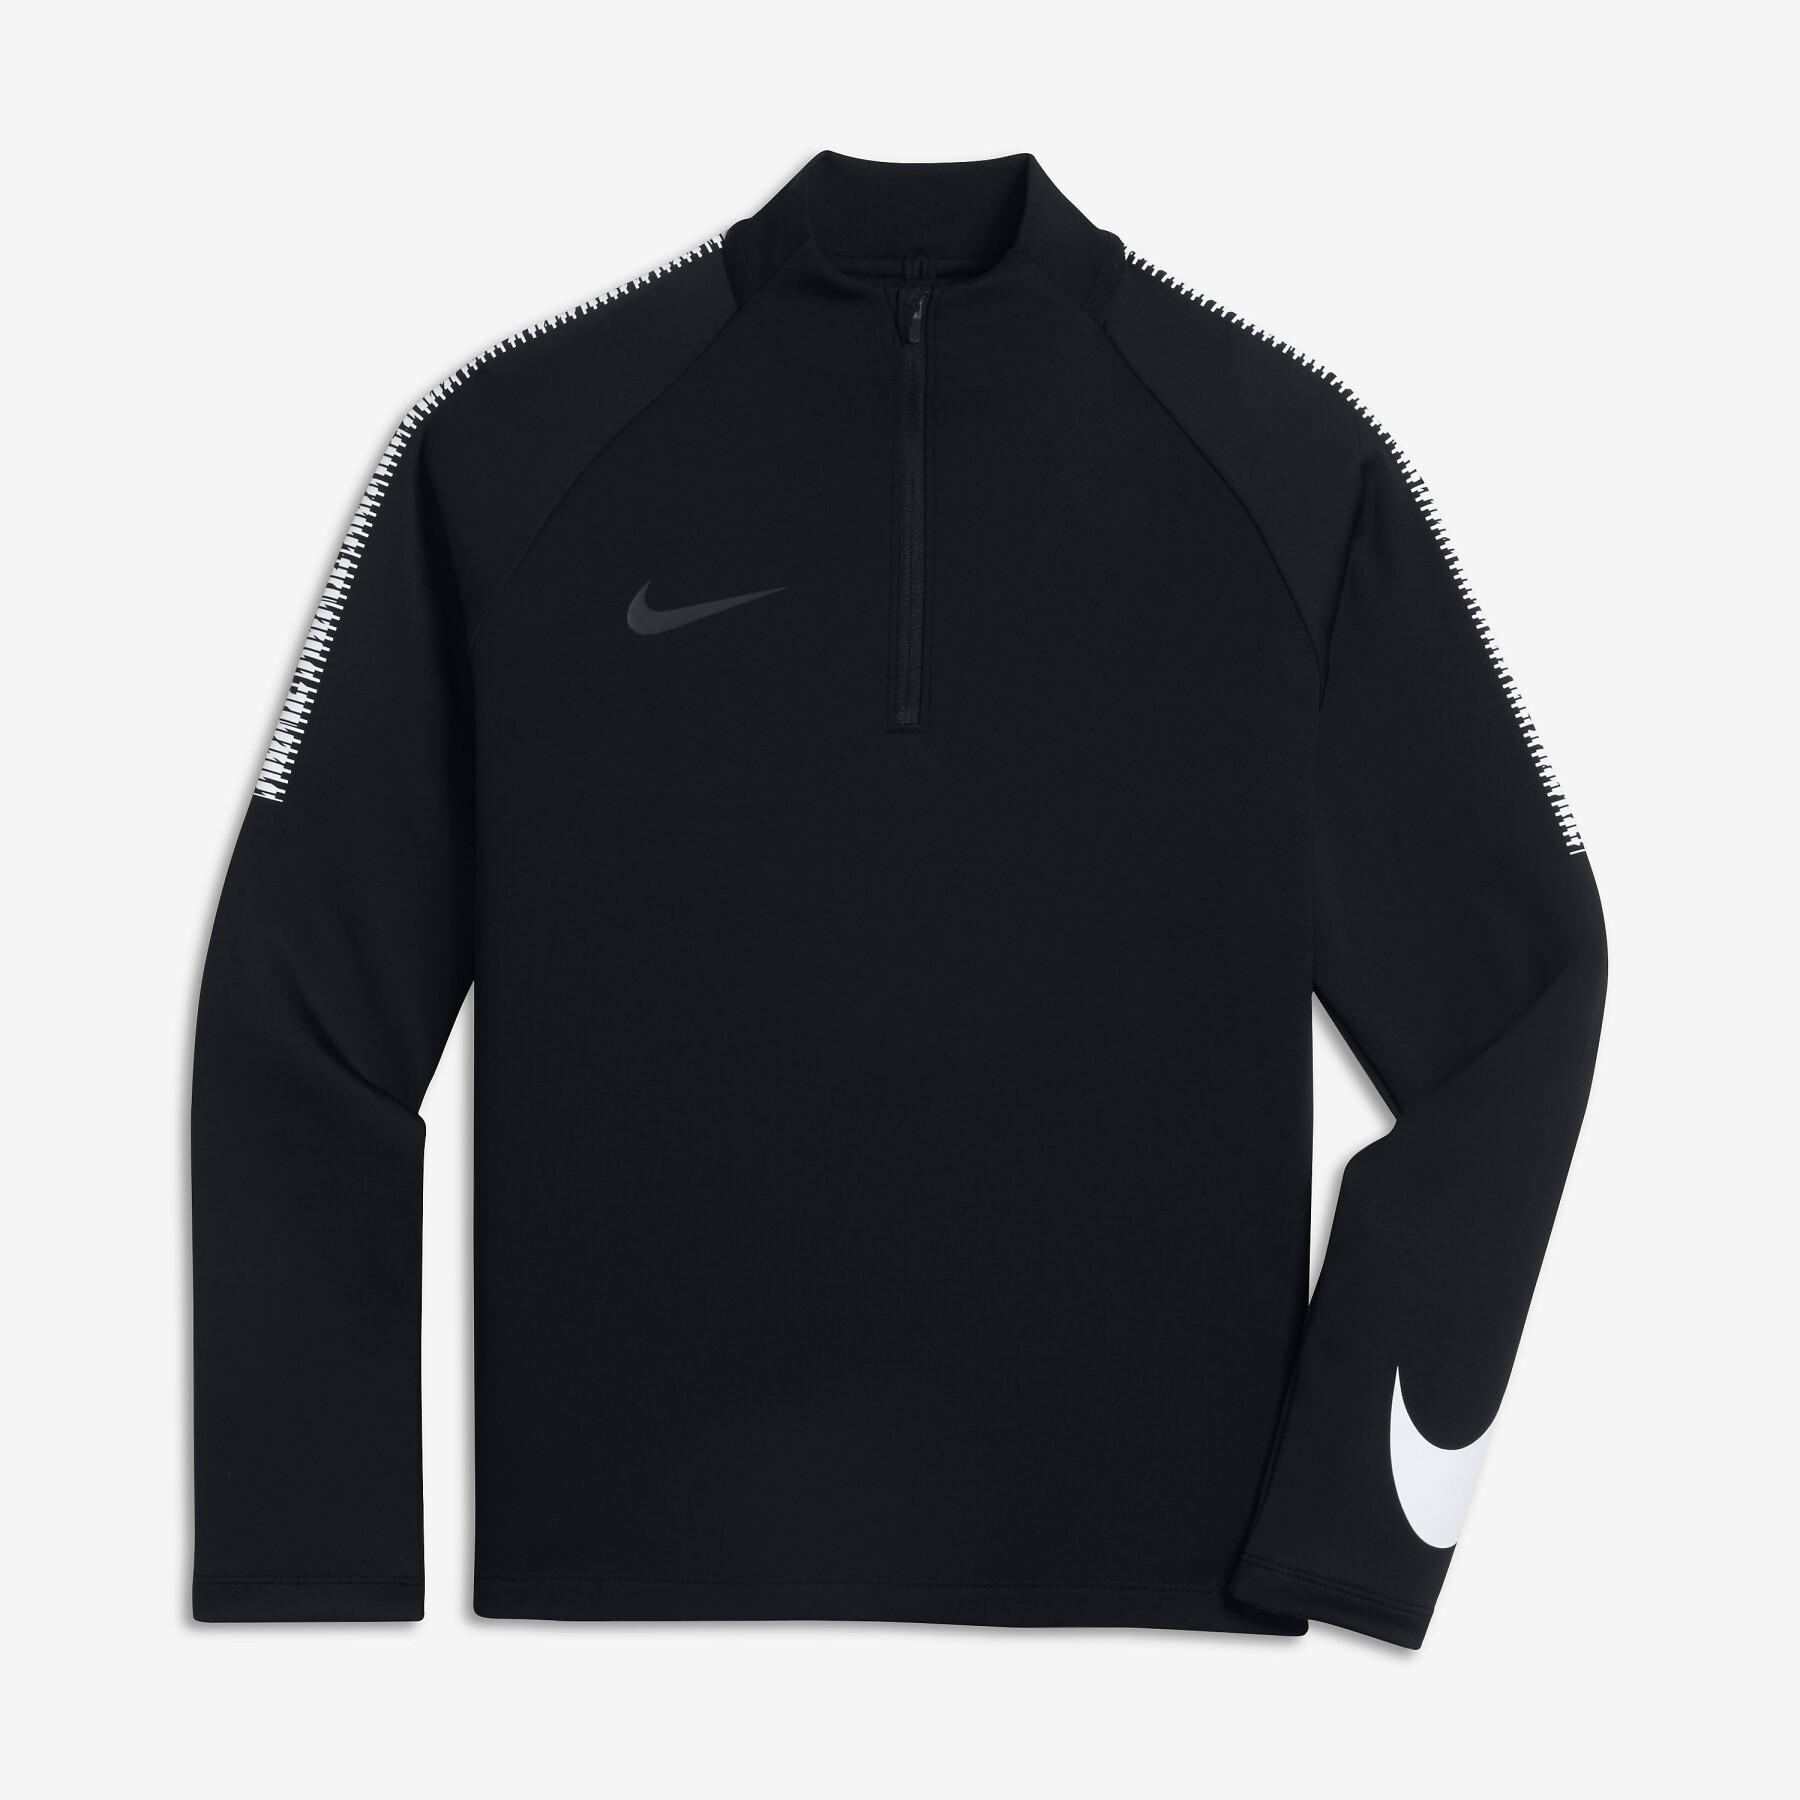 Maillot manches longues enfant Nike Dry Squad Drill 2017/2018